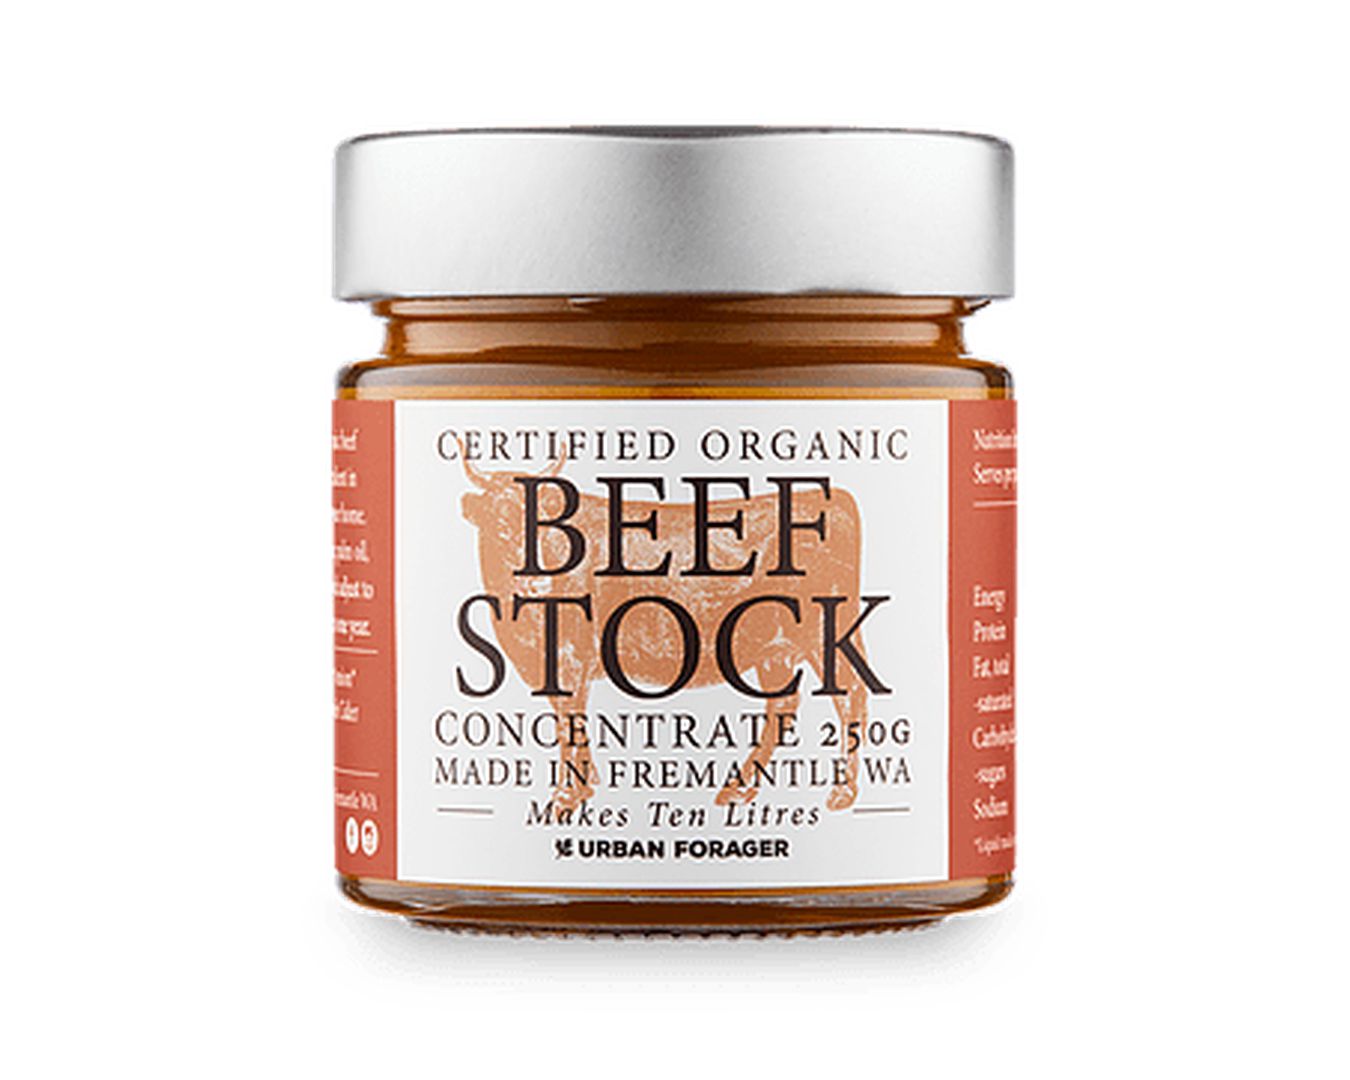 Urban Forager Beef Stock Concentrate 250g-Stock-The Local Basket